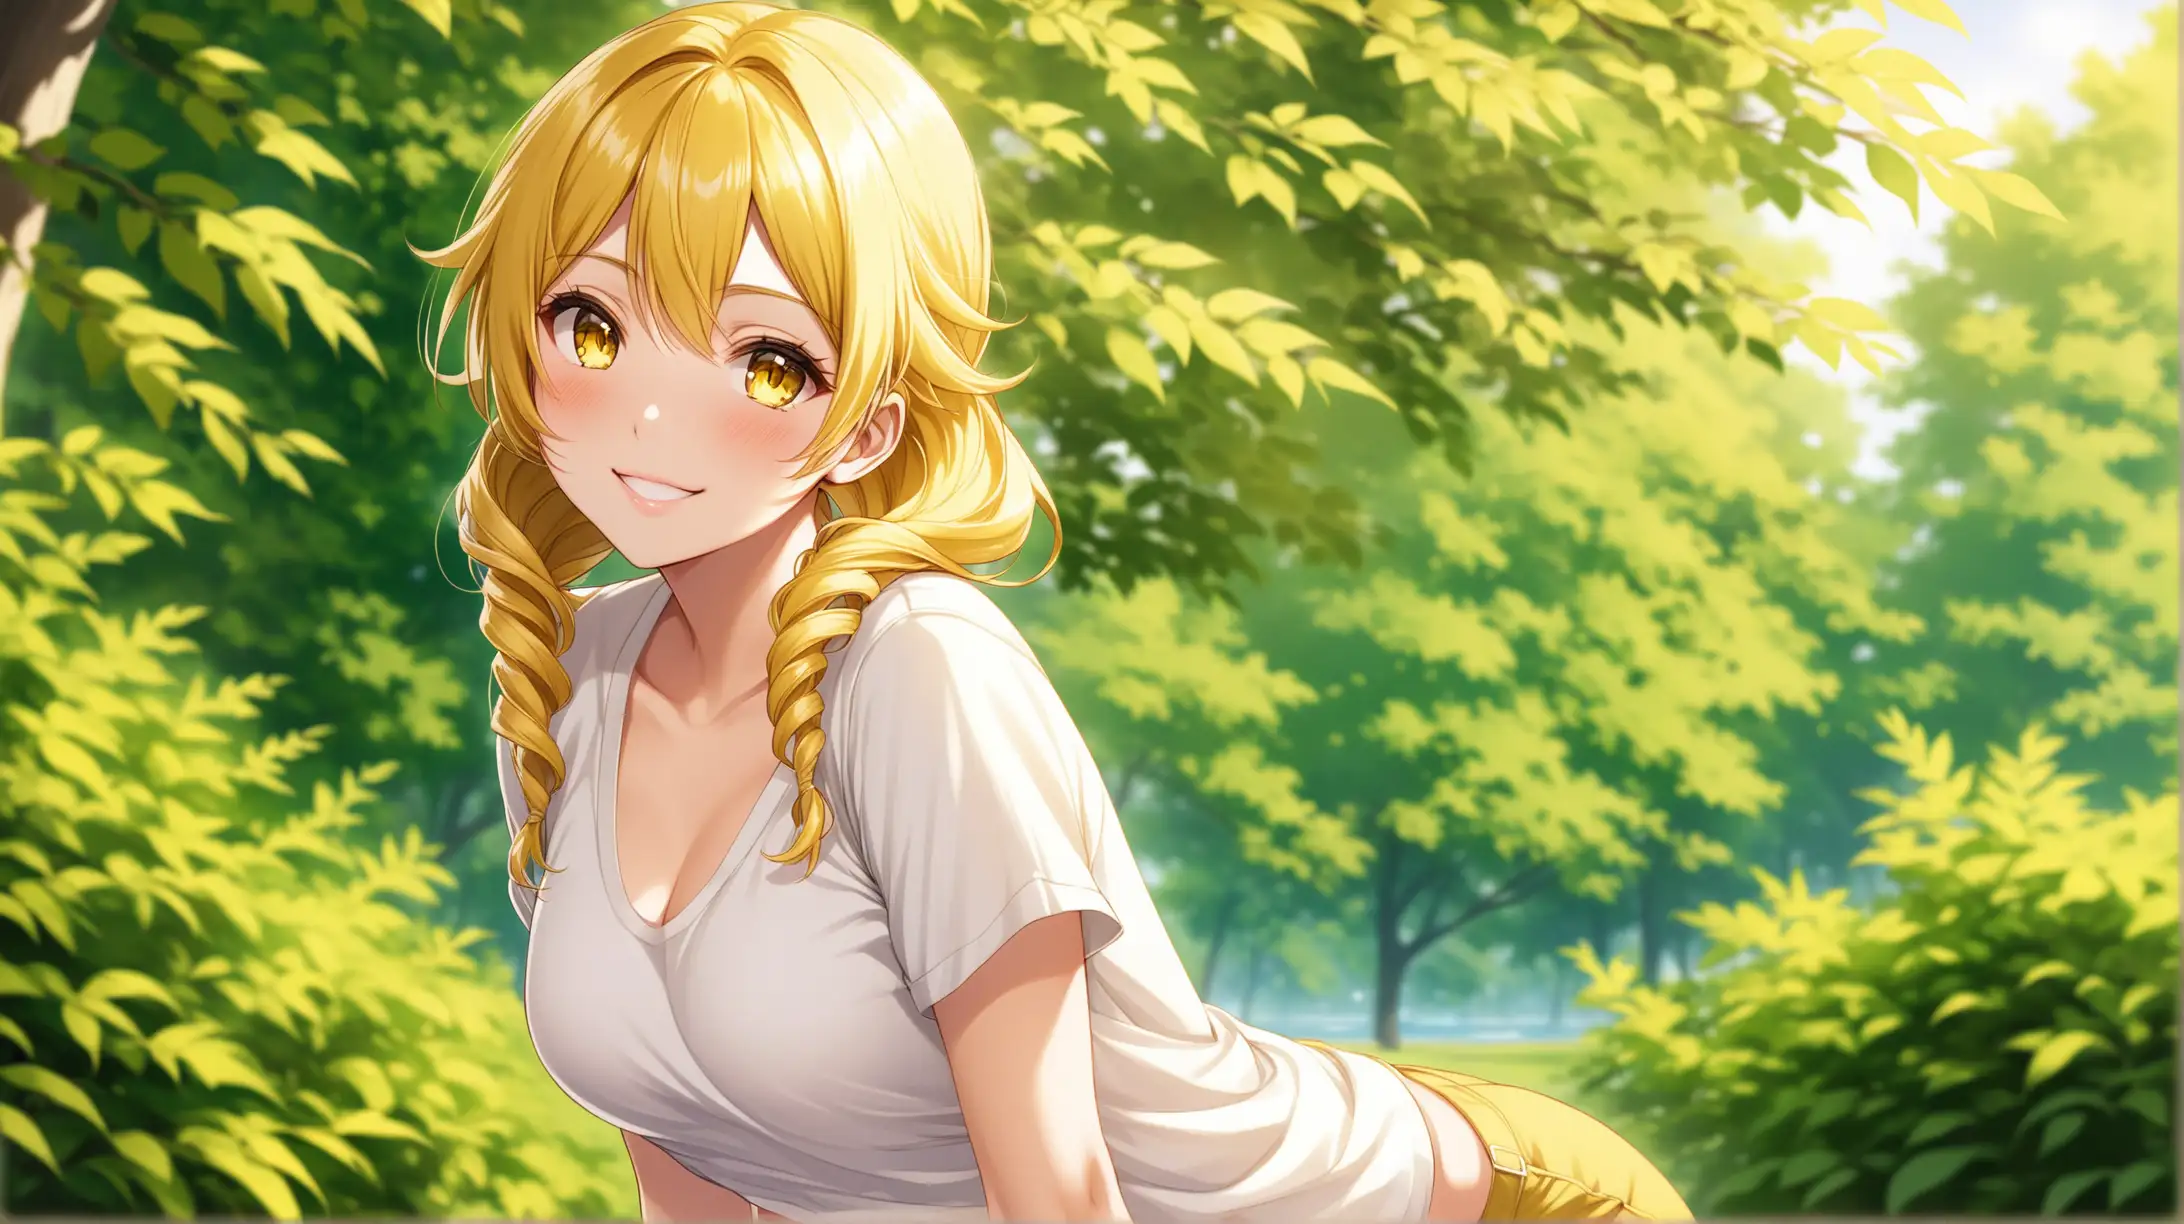 Blonde Mami Tomoe Seductively Smiling Outdoors in Casual Attire